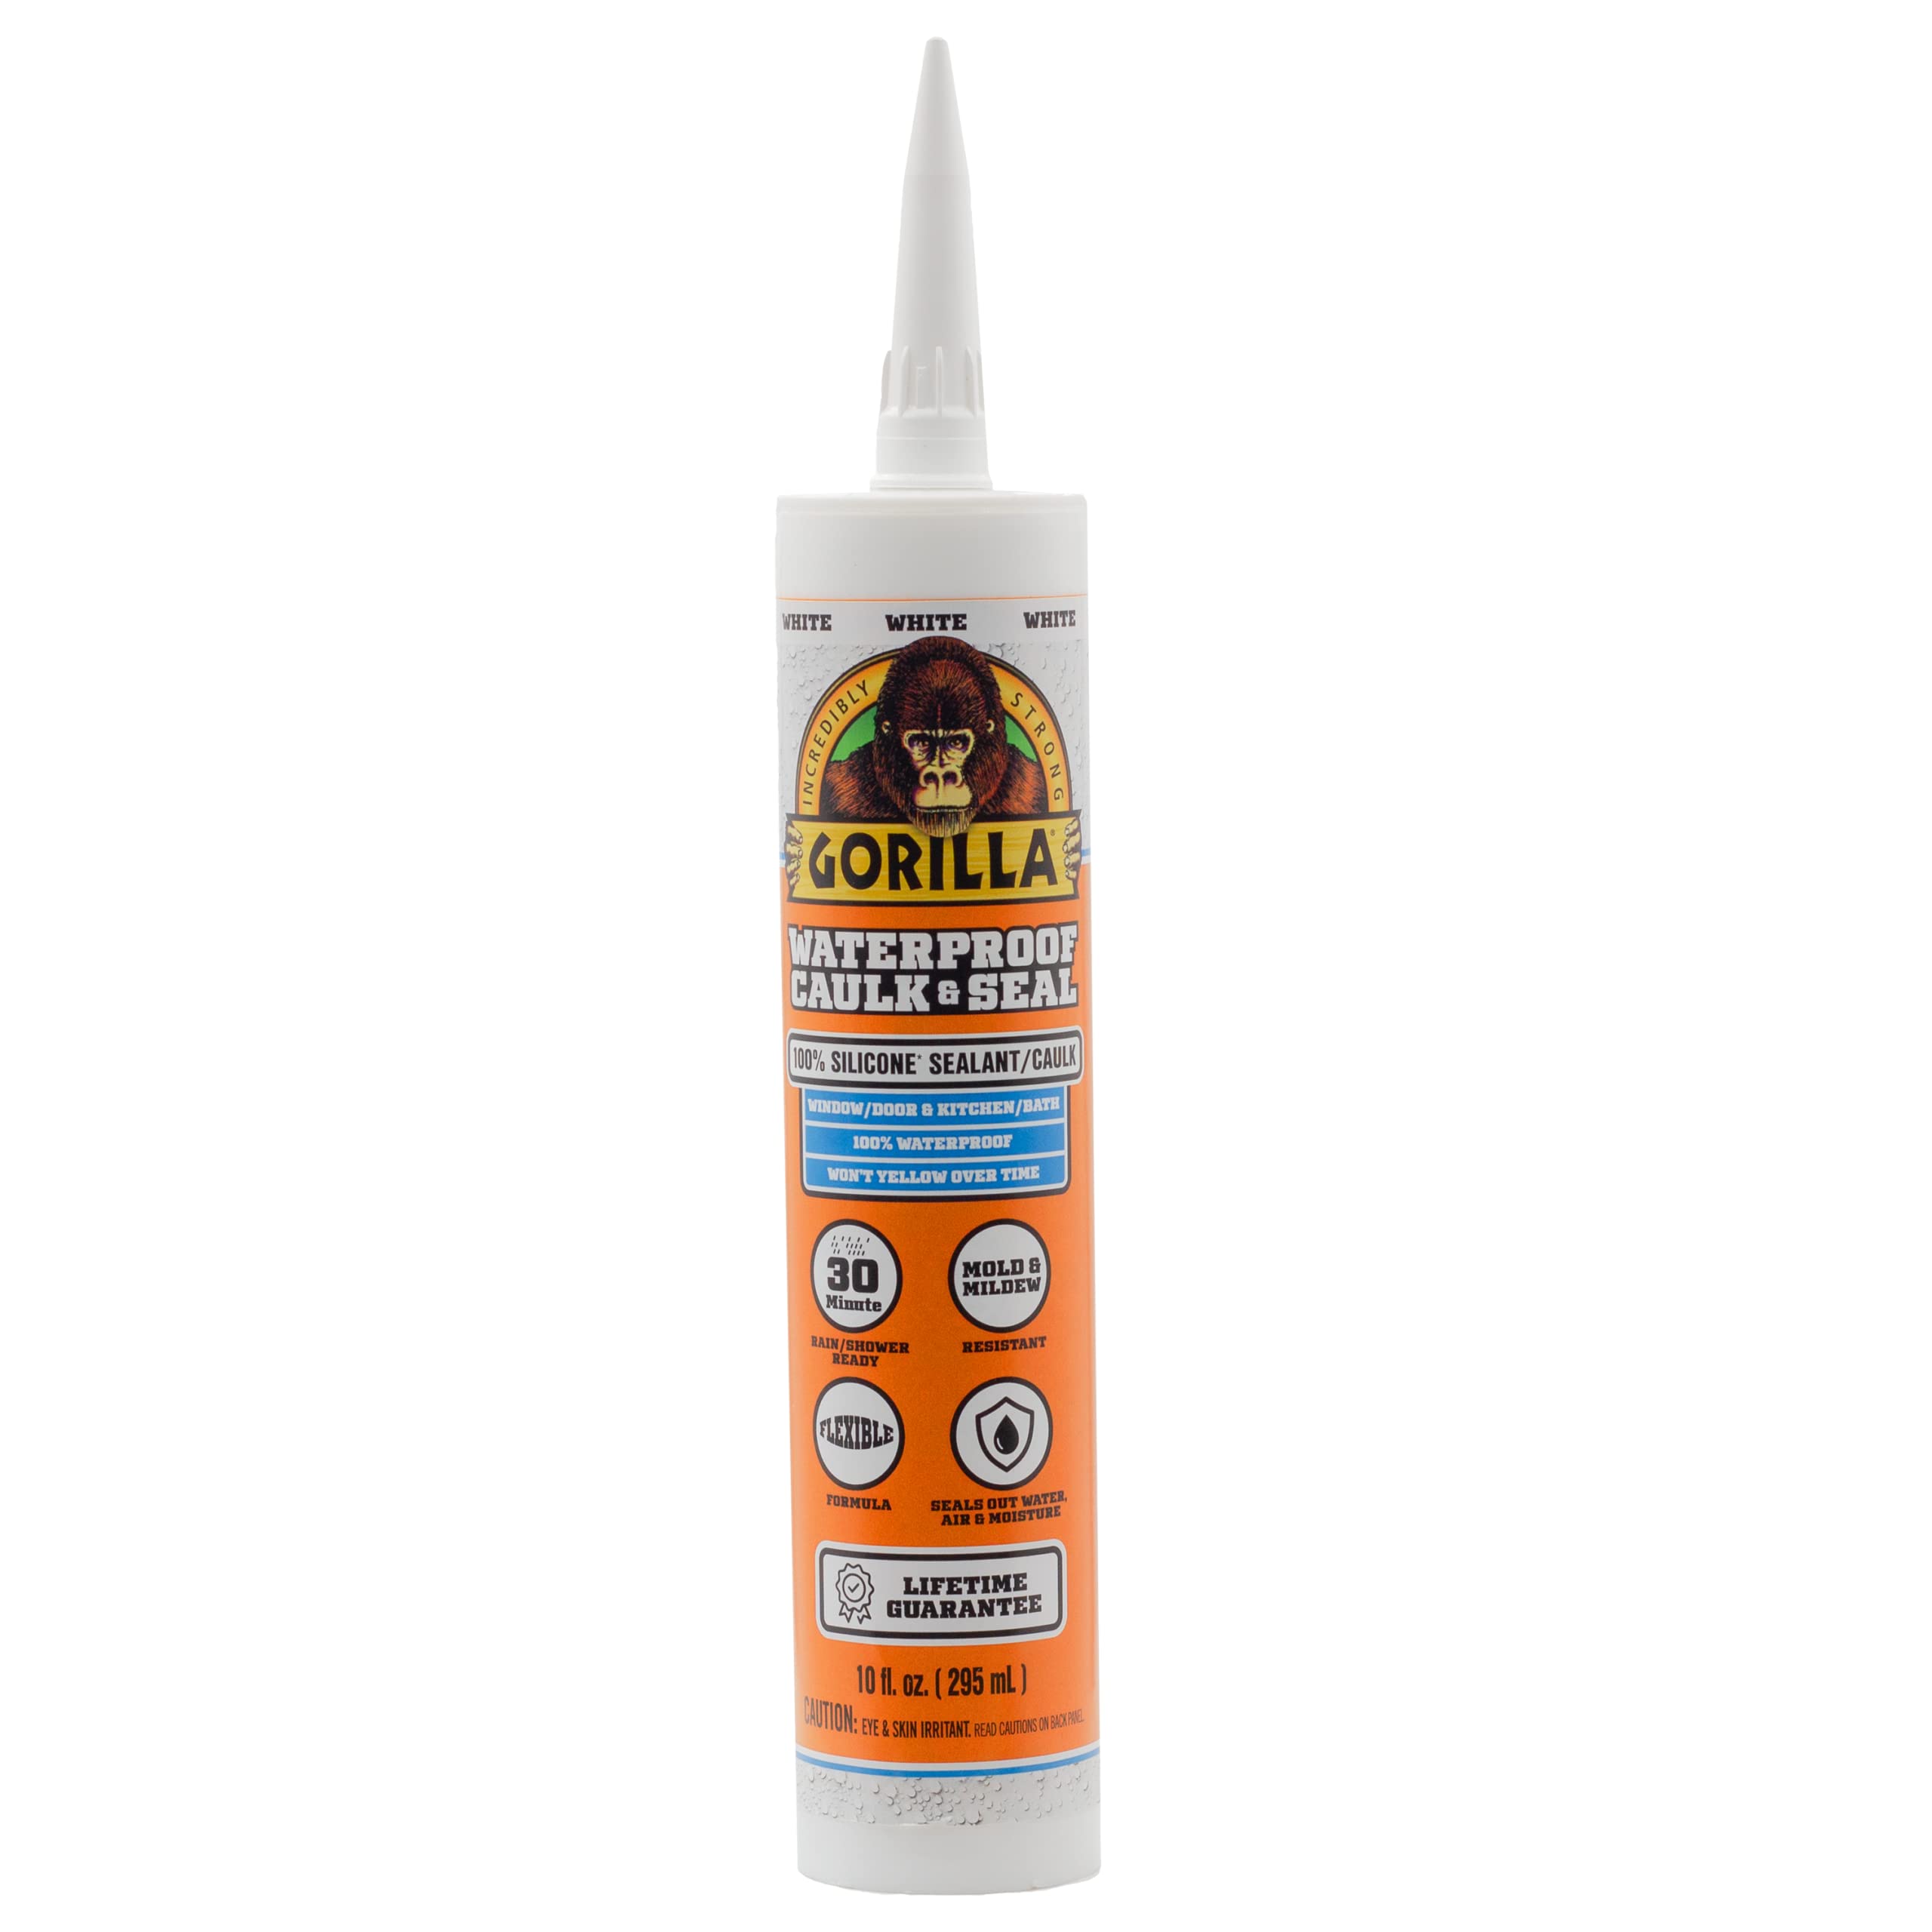 10-Ounce Gorilla Waterproof Caulk & Seal Silicone Sealant (White) $9.85 + Free Shipping w/ Prime or on orders $25+